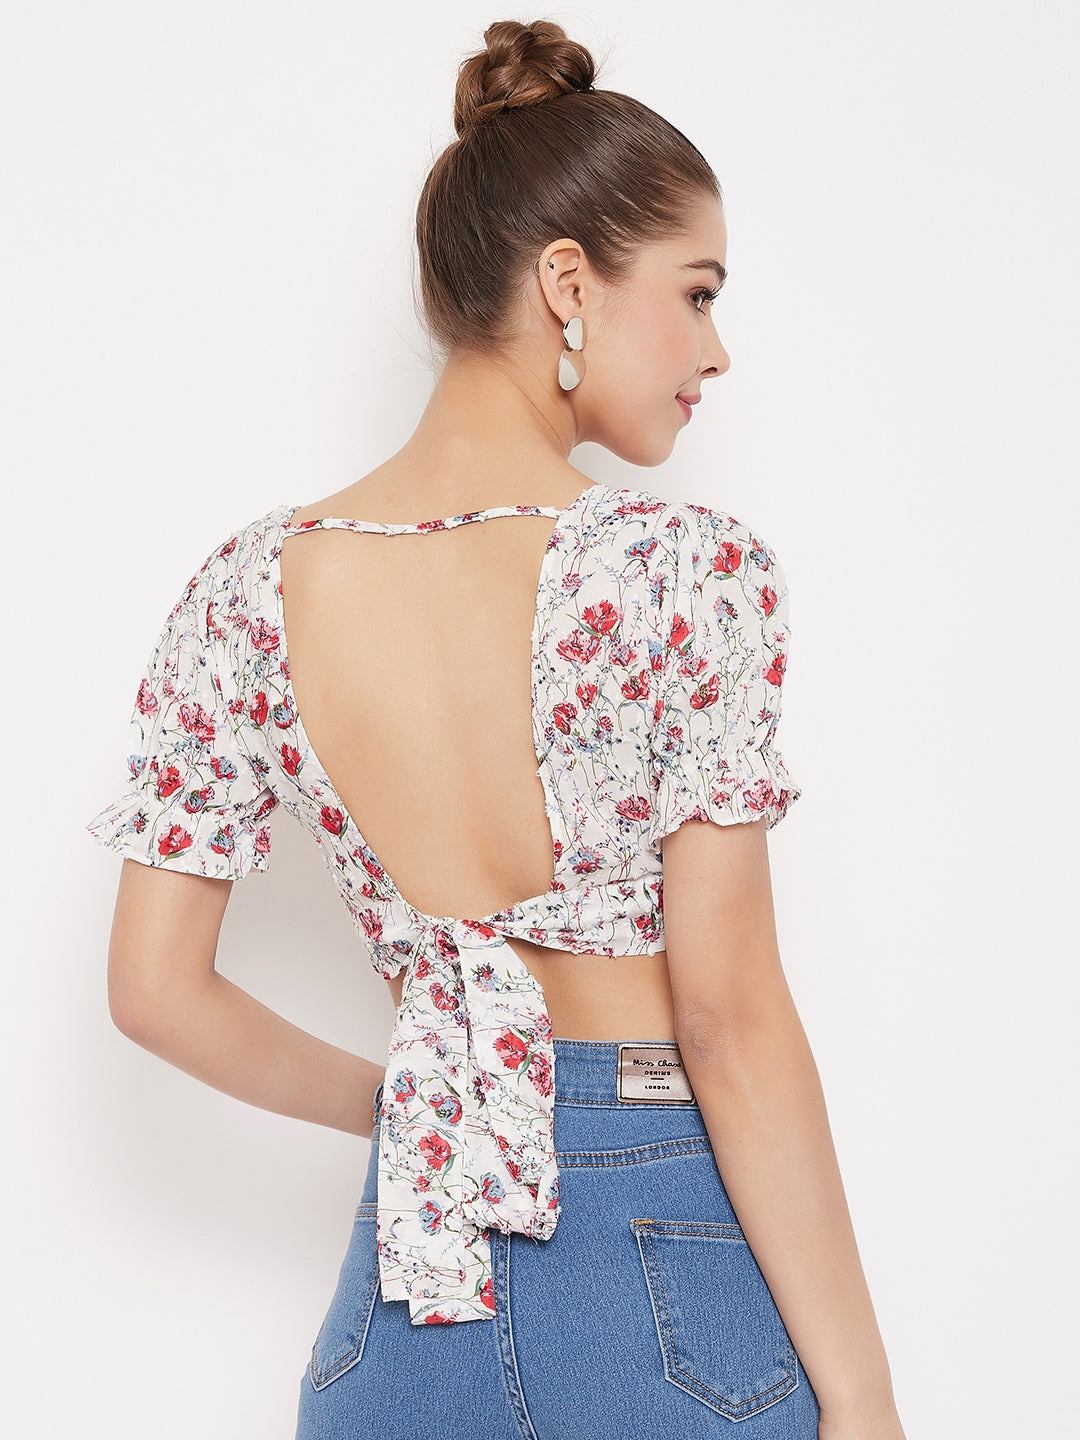  Backless Tops